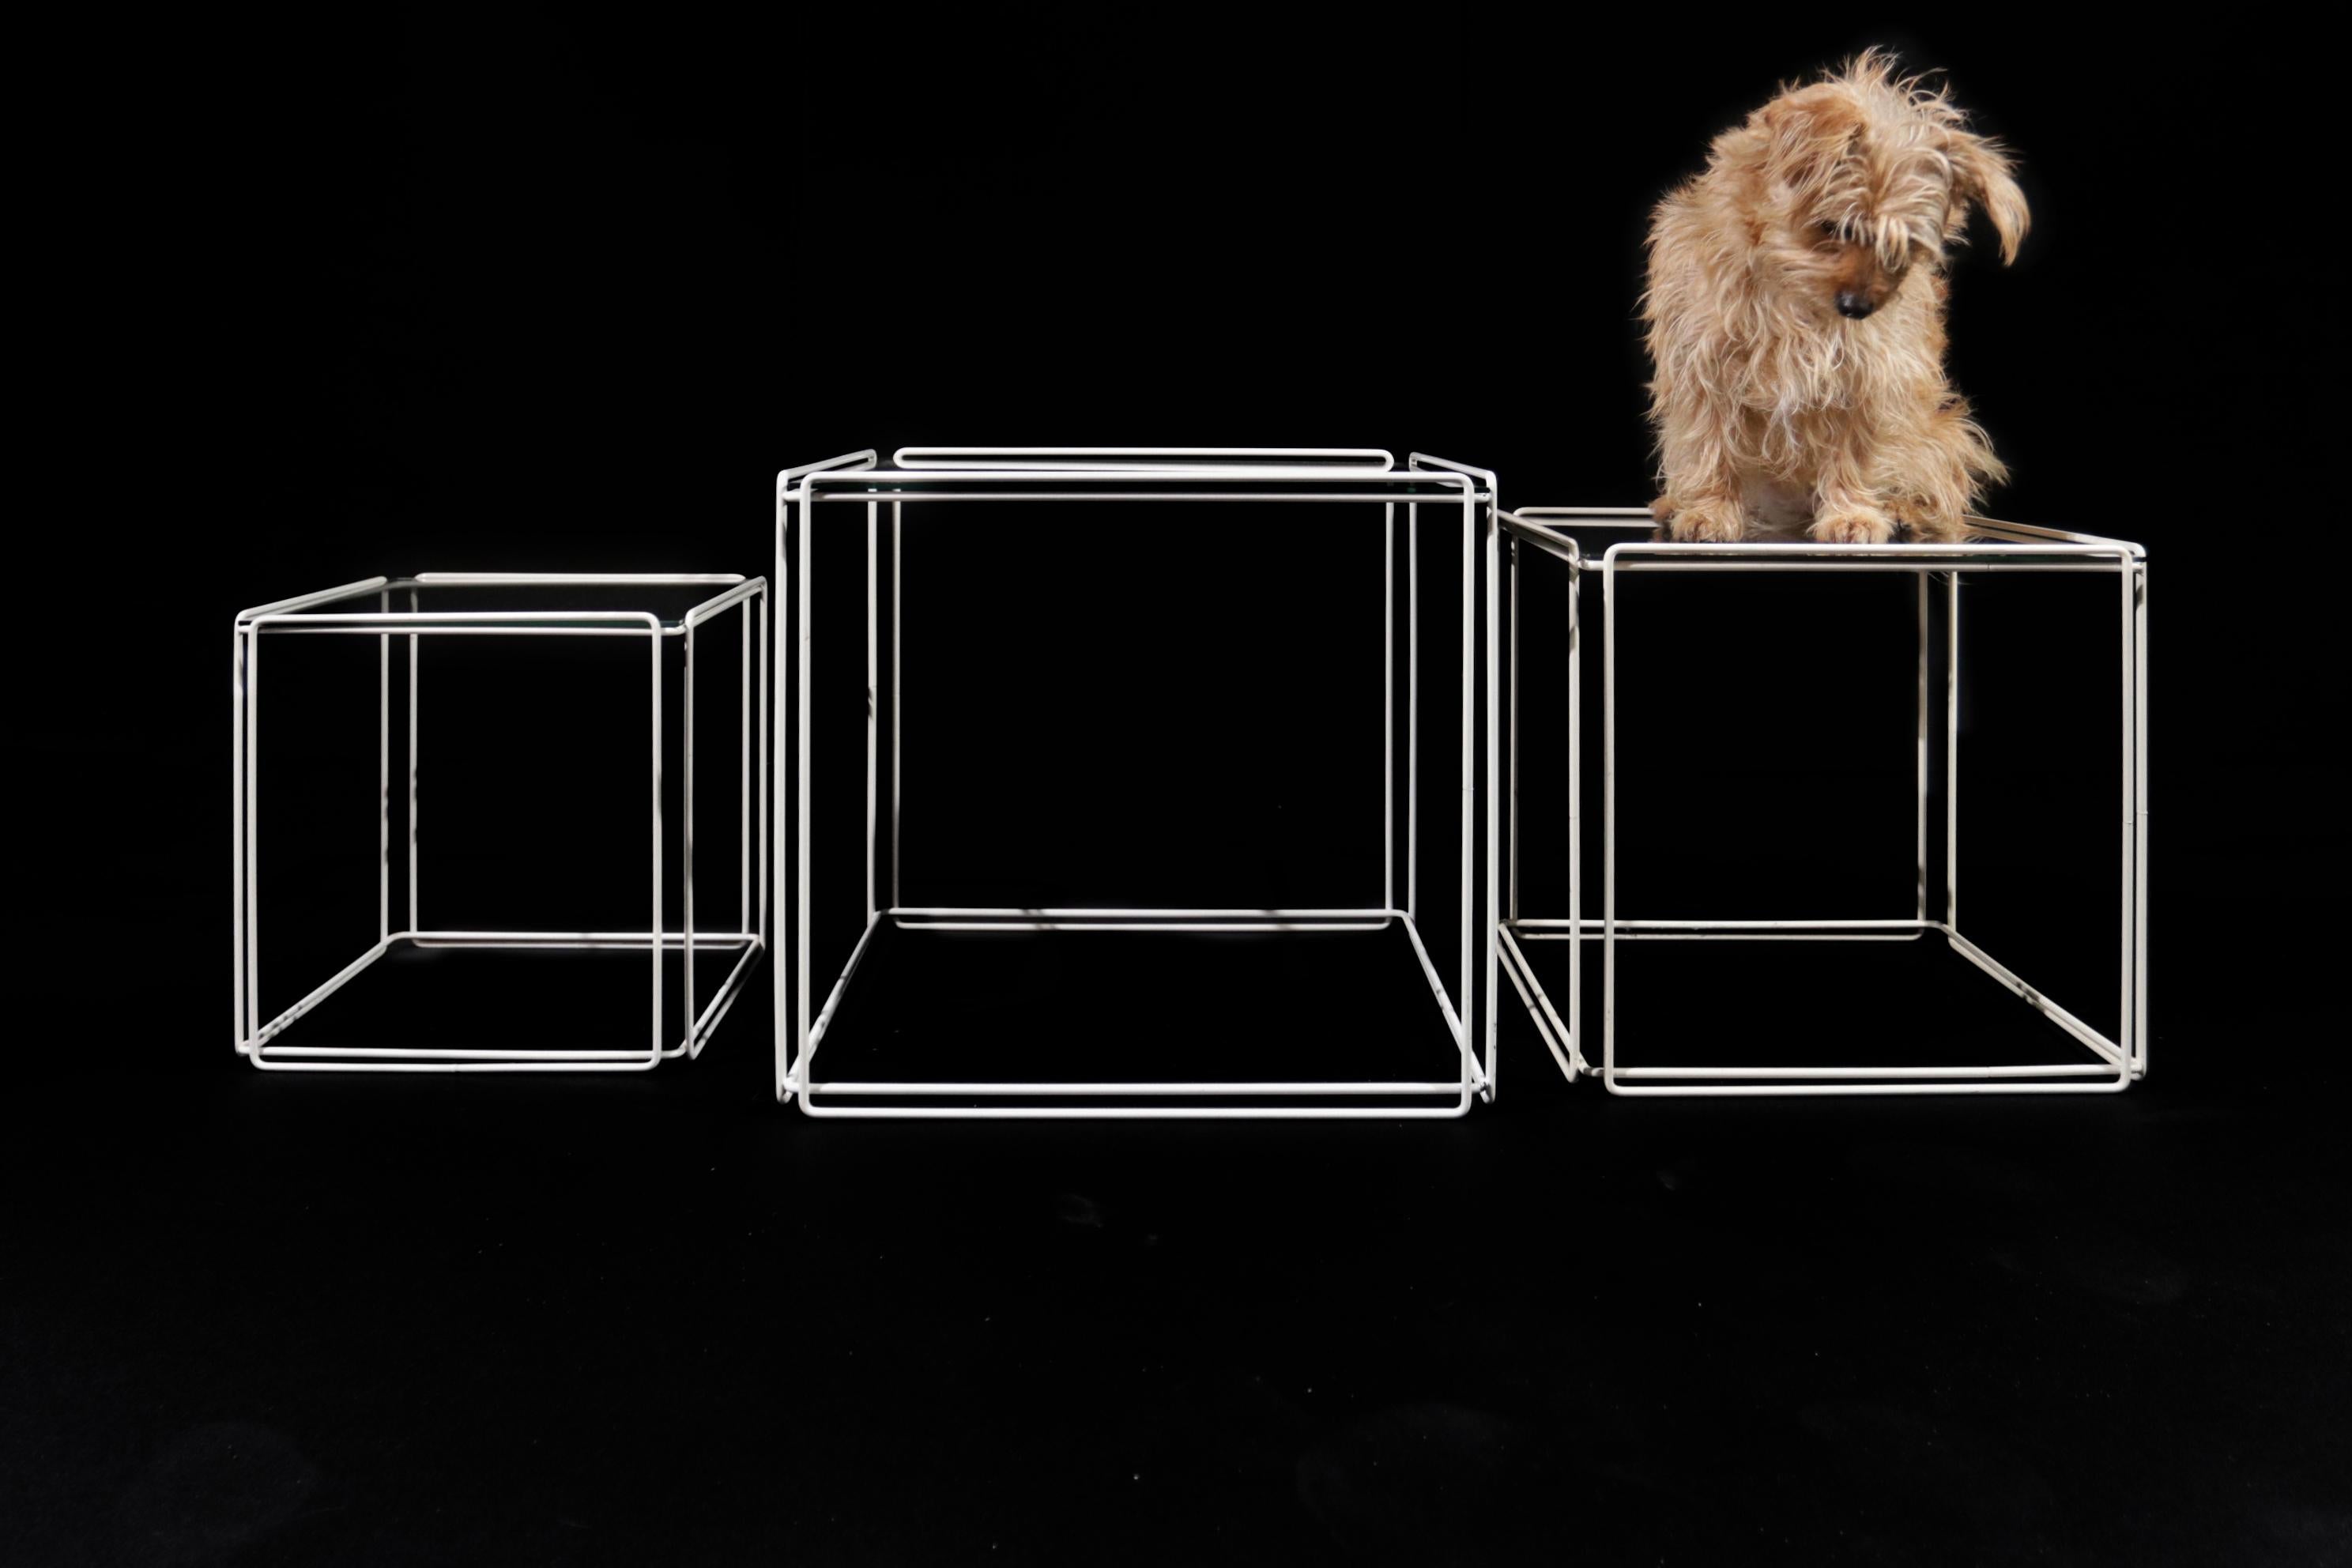 Set of 3 France Isocele Nesting tables designed by Max Sauze (1933-) for Attrow 1970s.
Made of glass and steel. White frame.
Minimal signs of use consistent with the age of these tables.